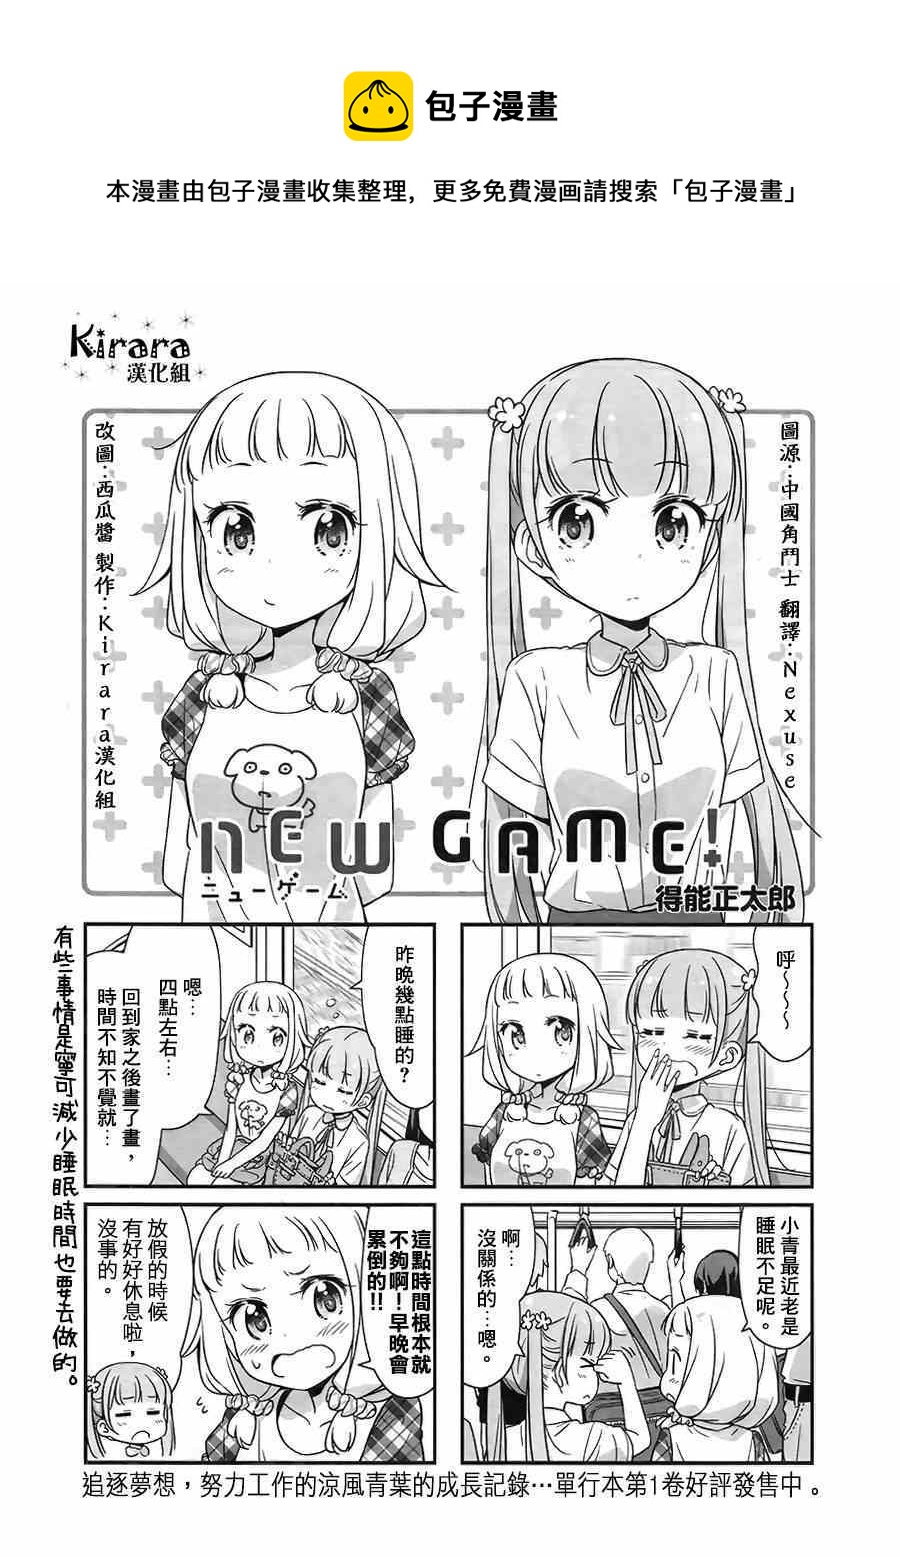 NEW GAME! - 21 第21話 - 1